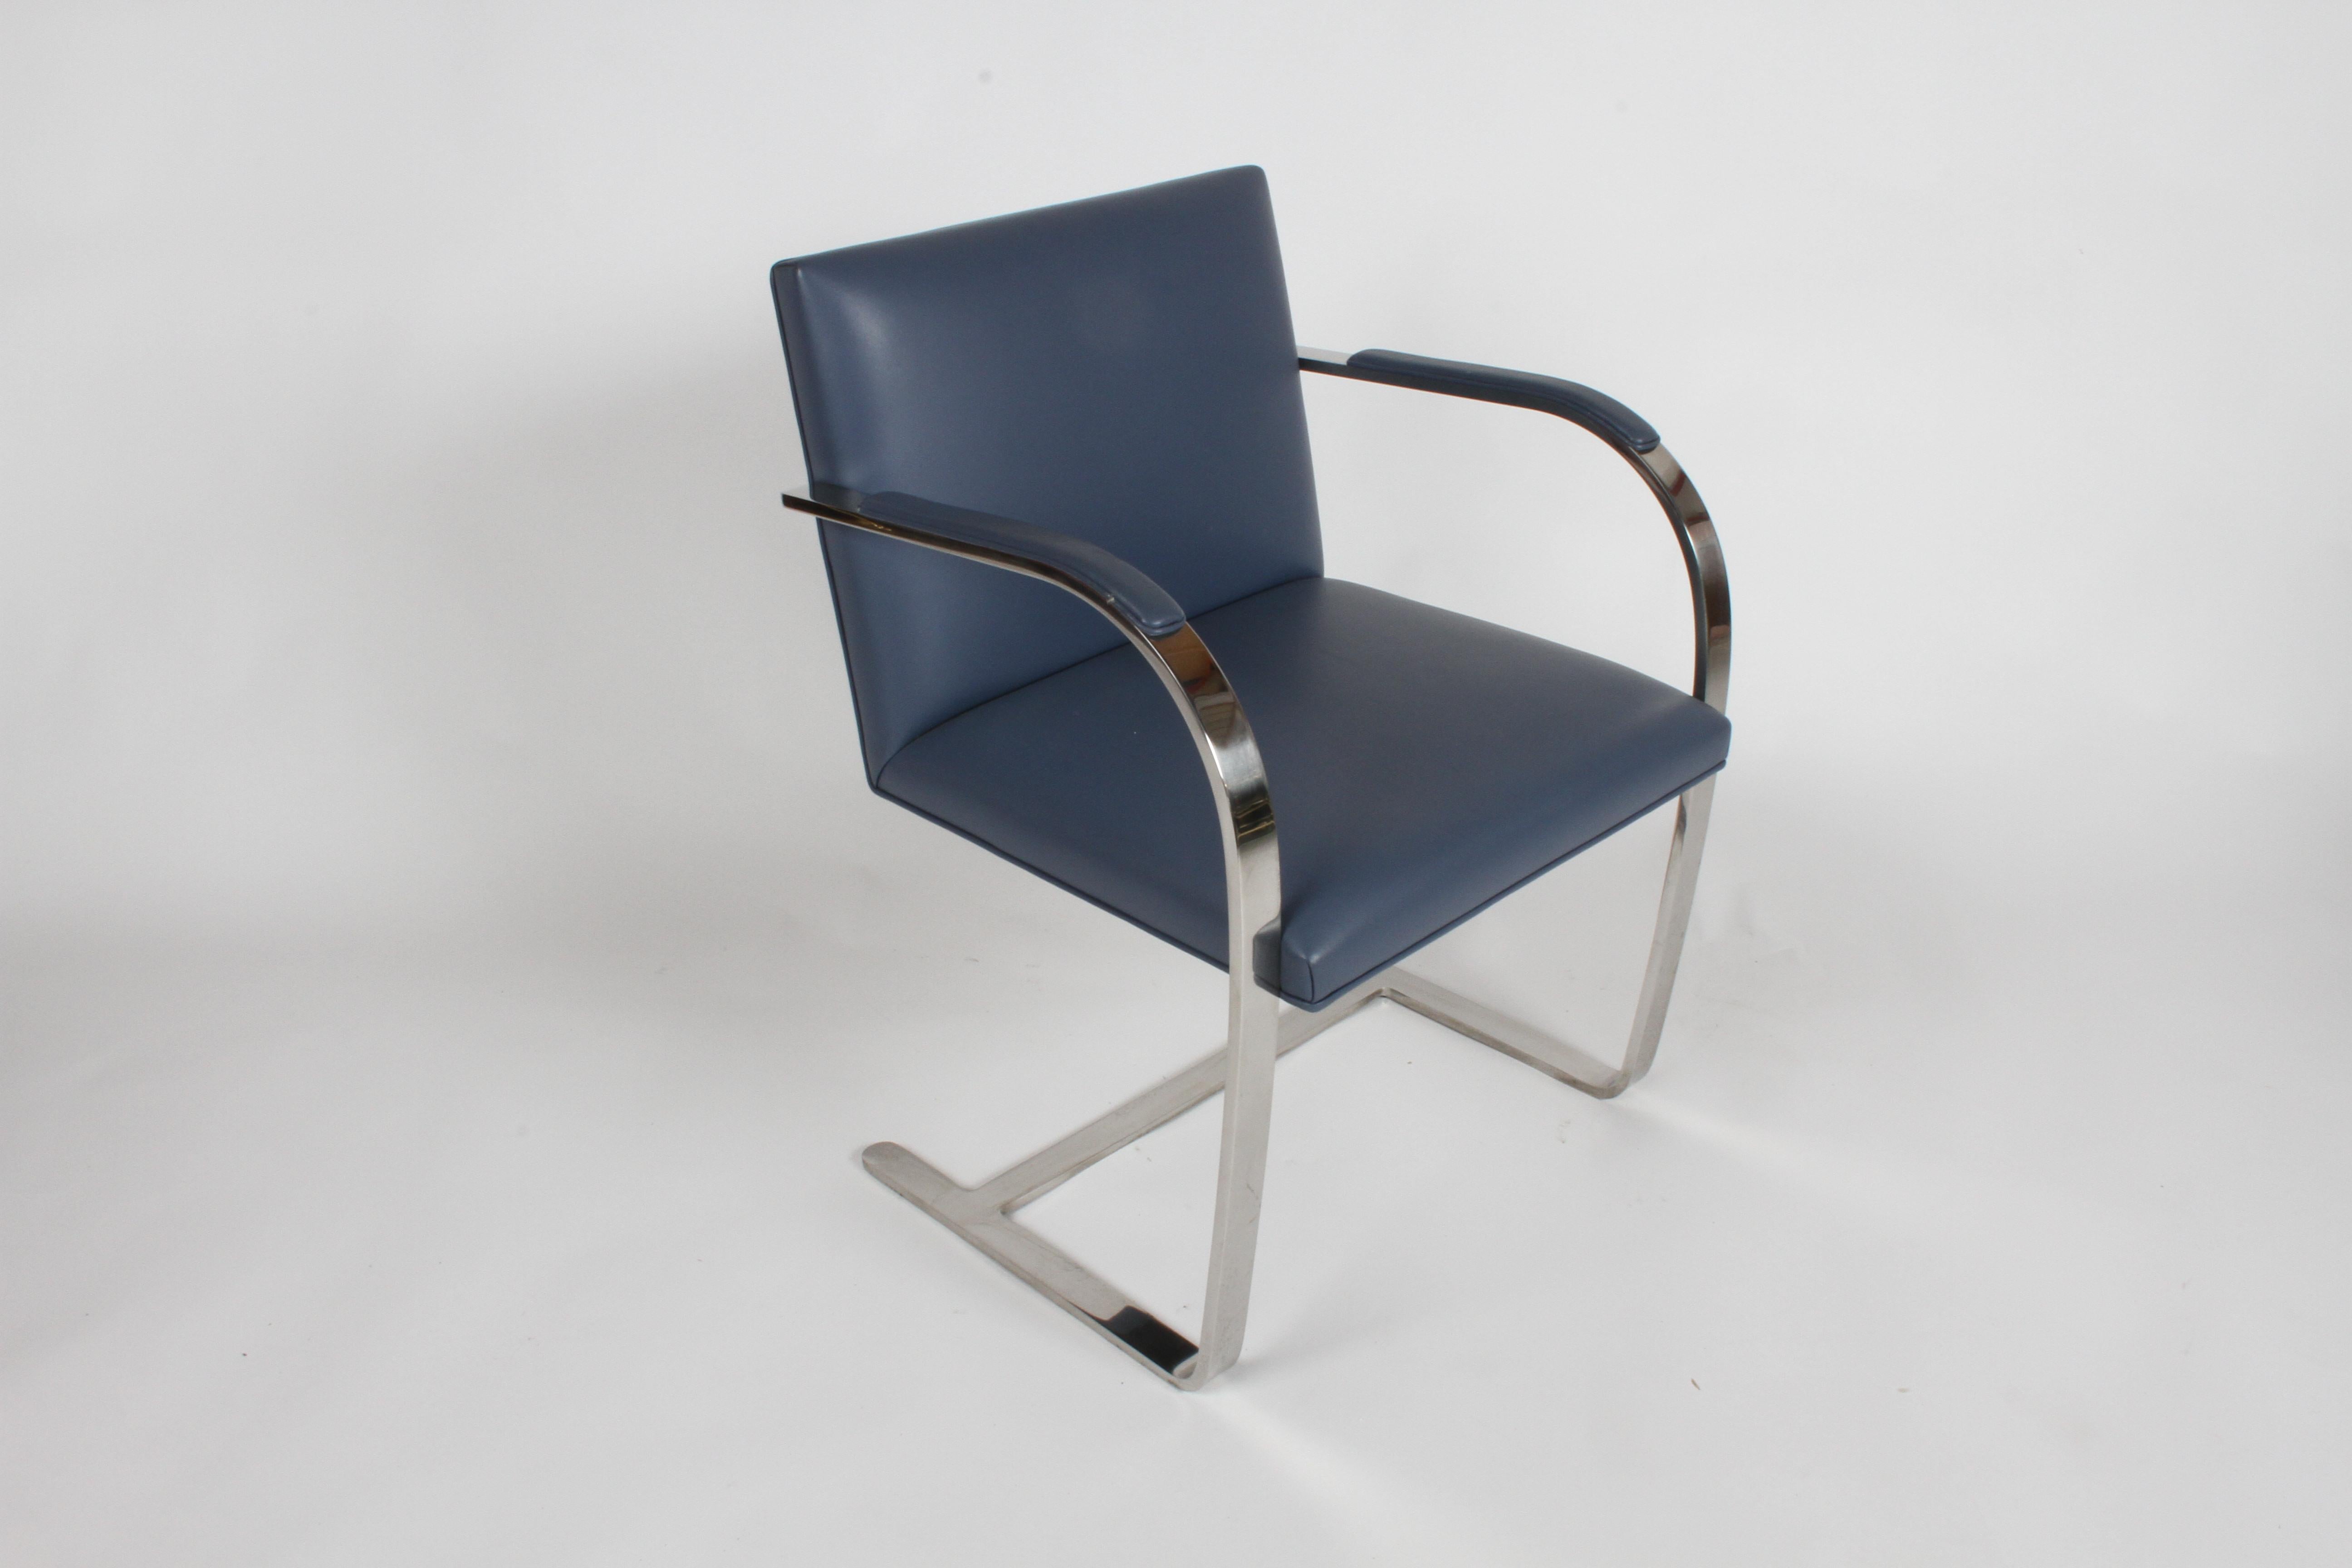 Leather Mies van der Rohe Flat Bar Brno Chairs by Knoll, Stainless